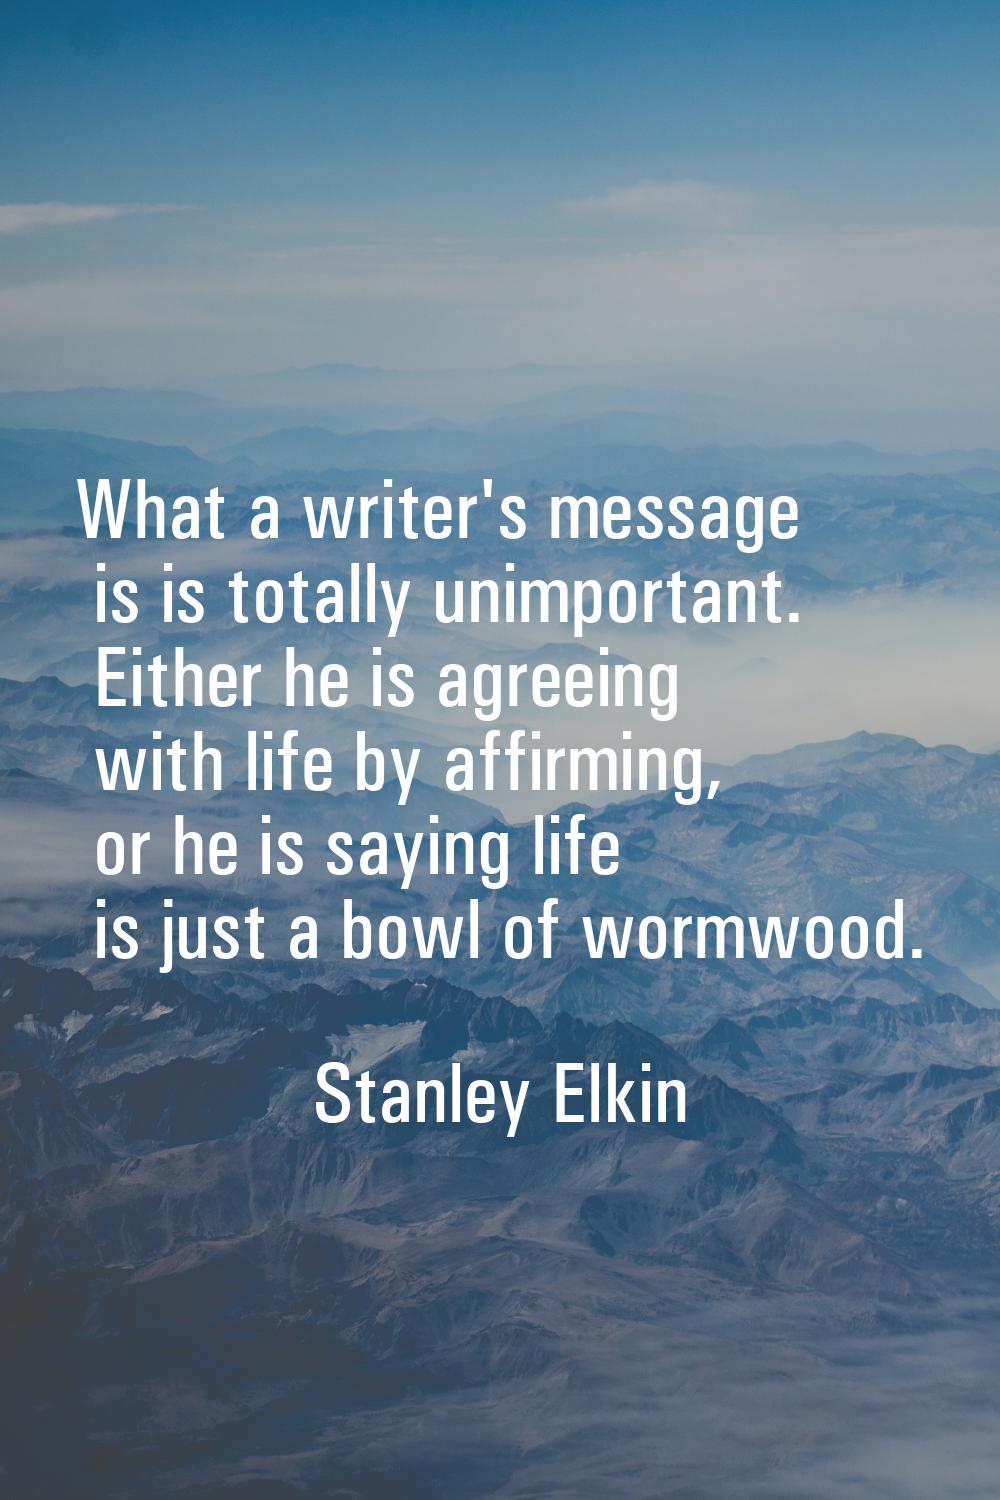 What a writer's message is is totally unimportant. Either he is agreeing with life by affirming, or